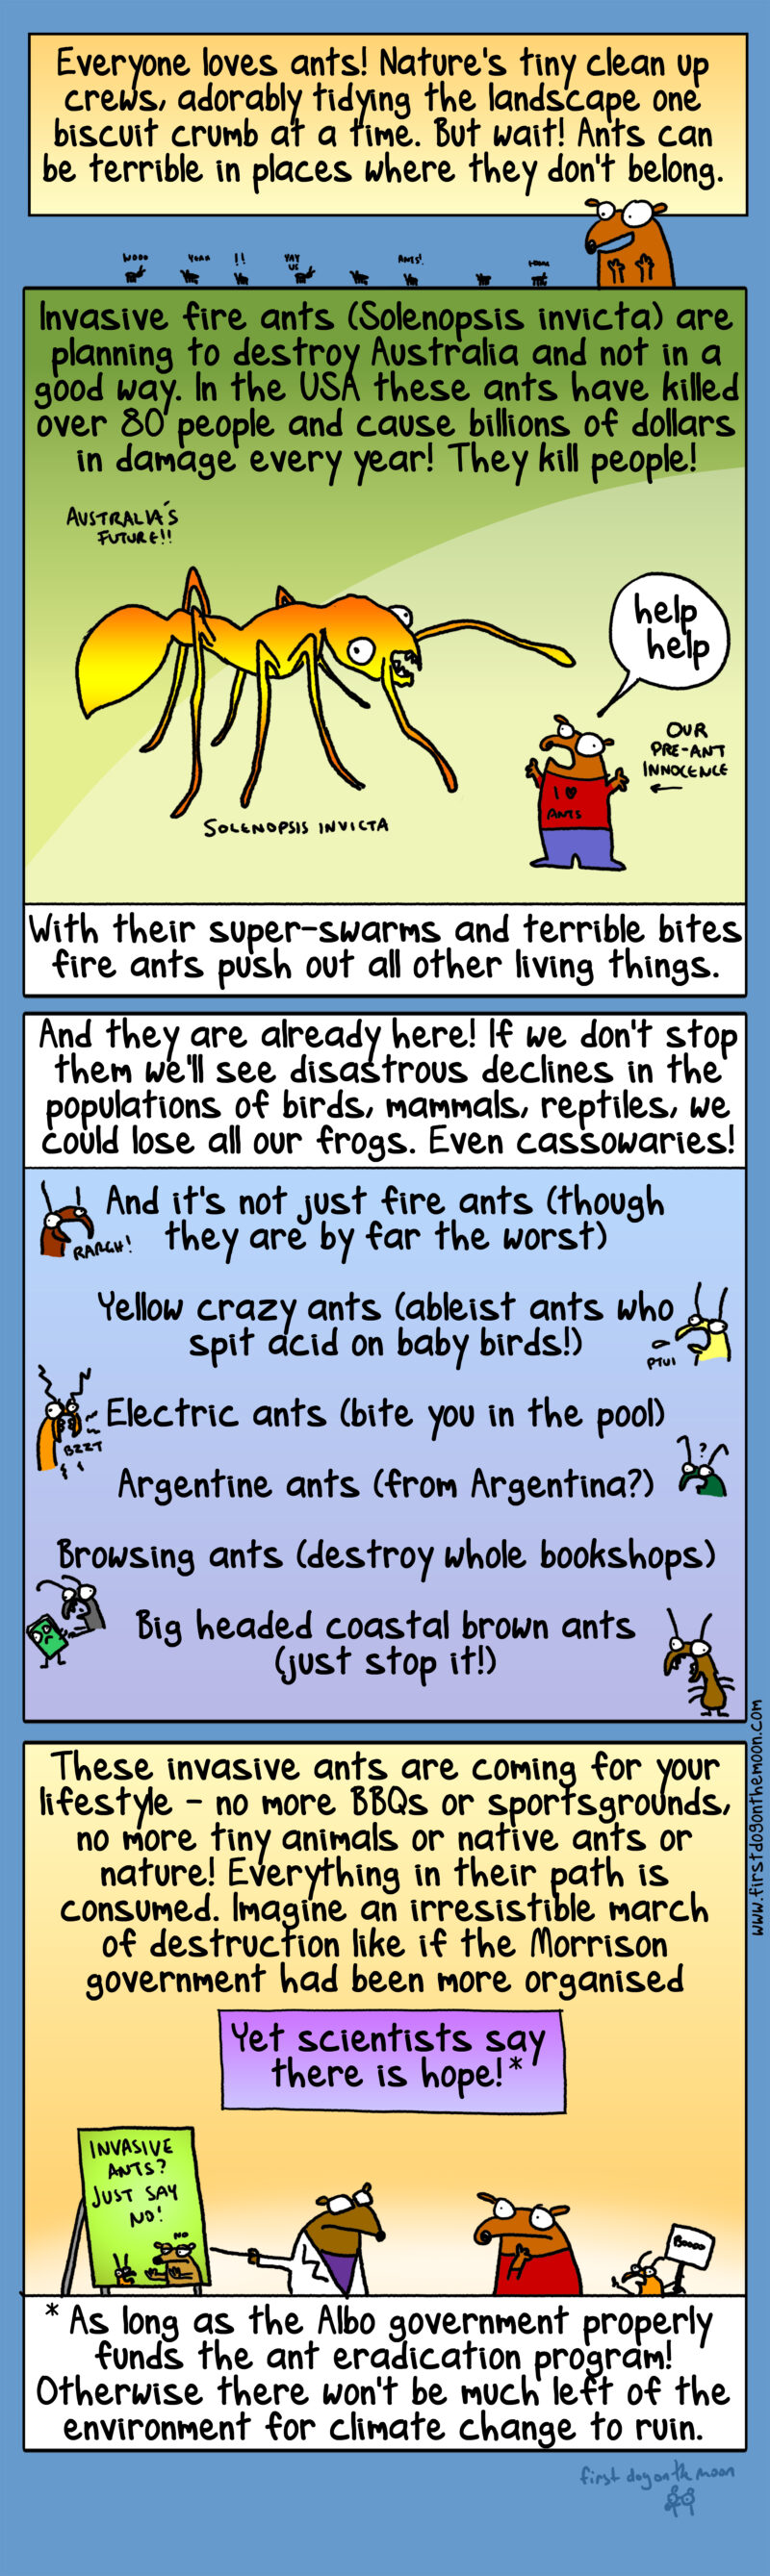 Fire ants are planning to destroy Australia and not in a good way